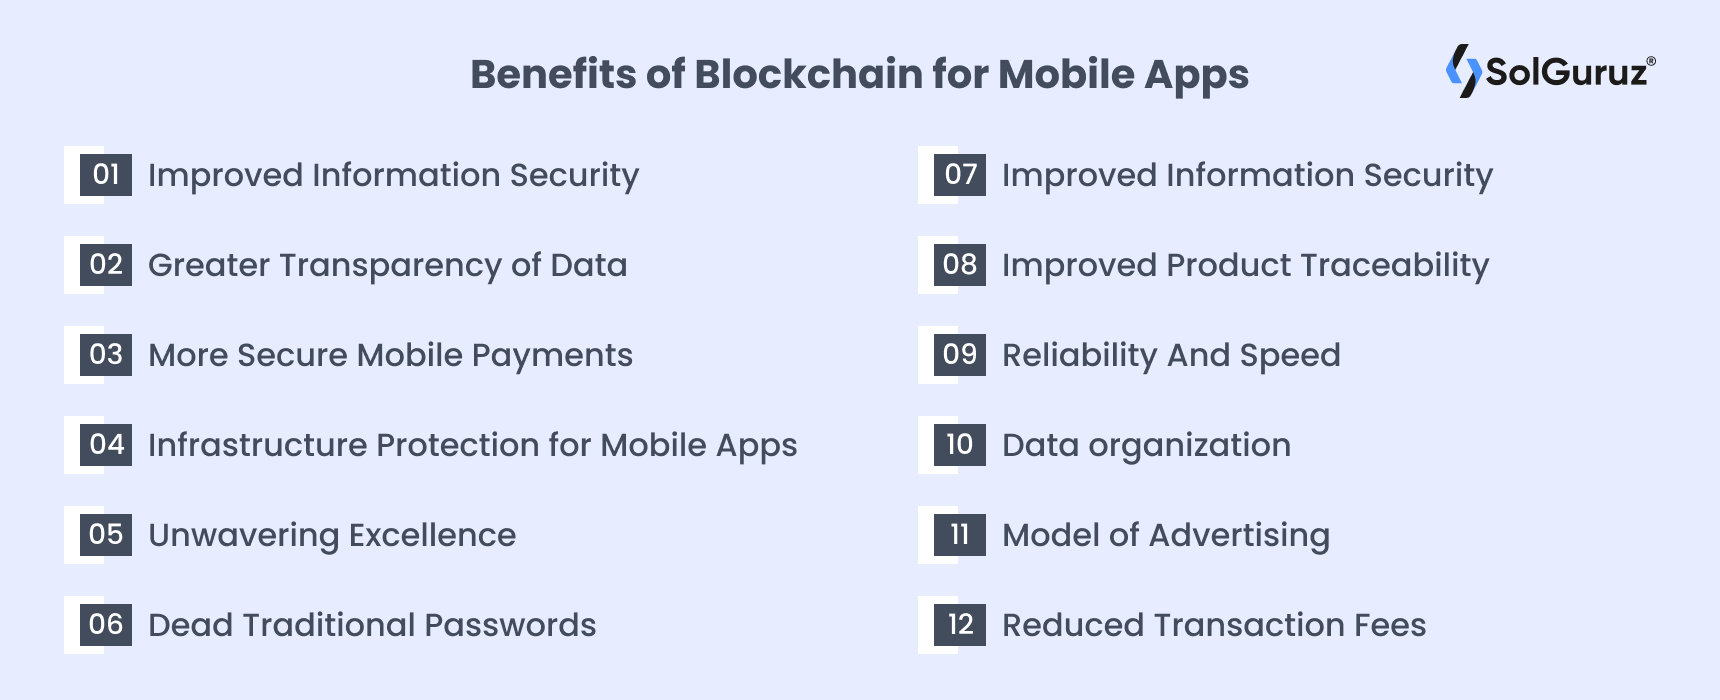 Benefits of Blockchain for Mobile Apps